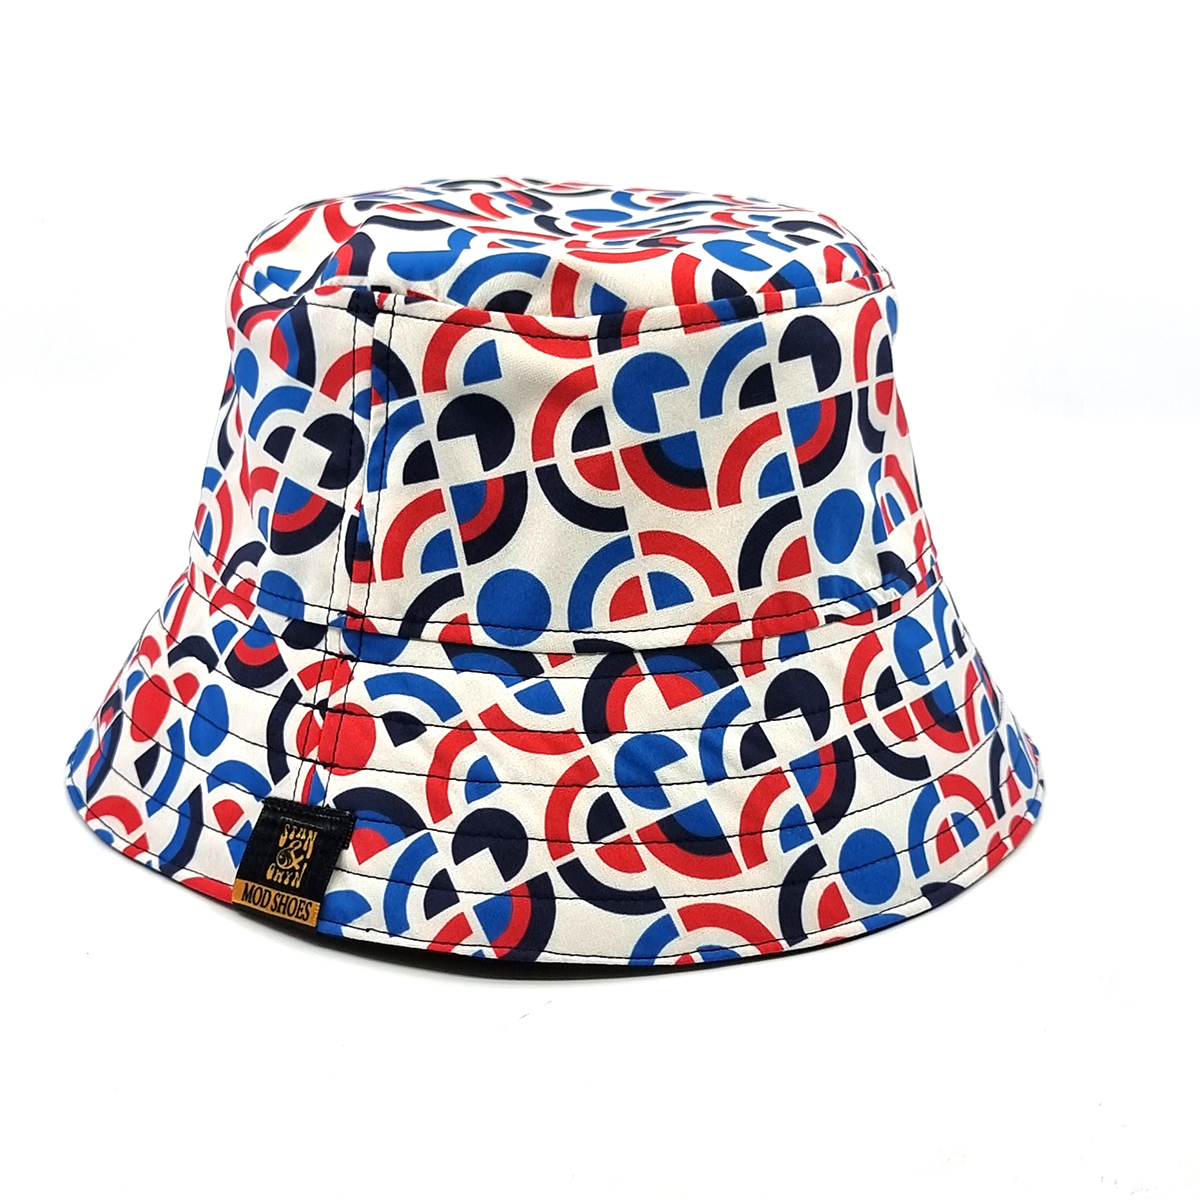 https://www.modshoes.co.uk/wp-content/uploads/2022/05/the-cappello-bucket-hat-red-white-blue-pattern-reversible-britpop-stone-roses-reni-oasis-spike-island-90s-madchester-raving-01.jpg